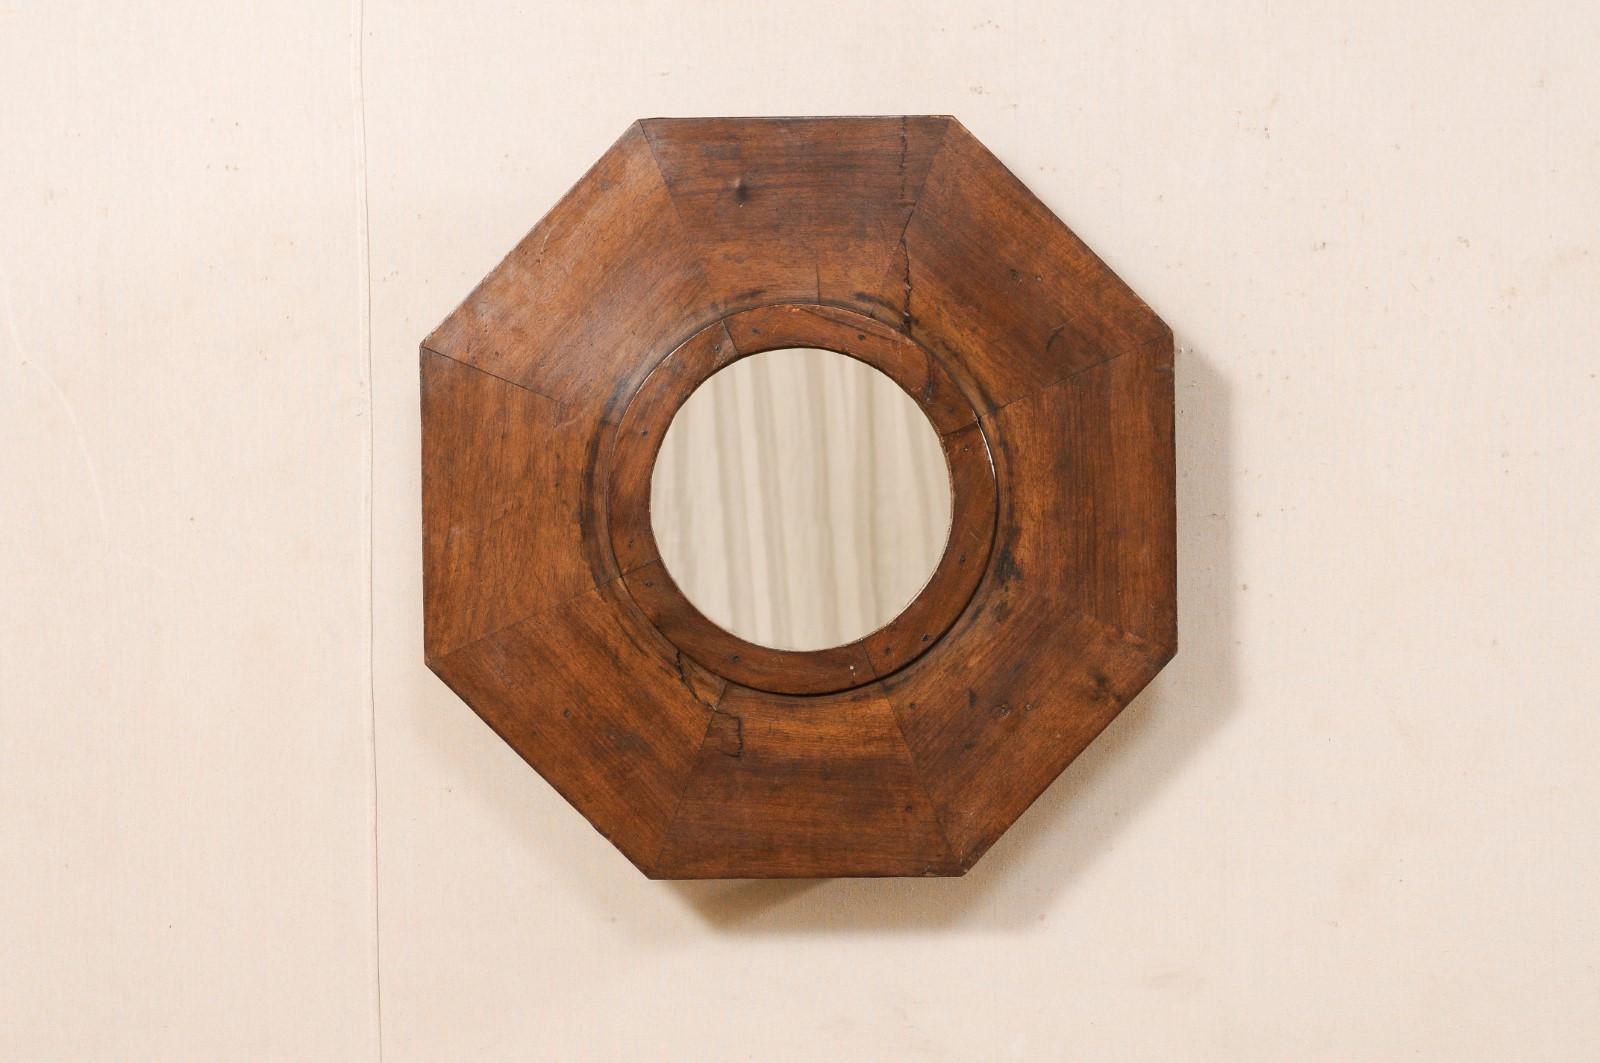 A fantastic octagonal mirror which has been custom fashioned with an antique Spanish wooden brazier as the surround, with new mirrored glass in it's center. This wall decoration features a new, circular-shaped mirror at center, within a beautifully